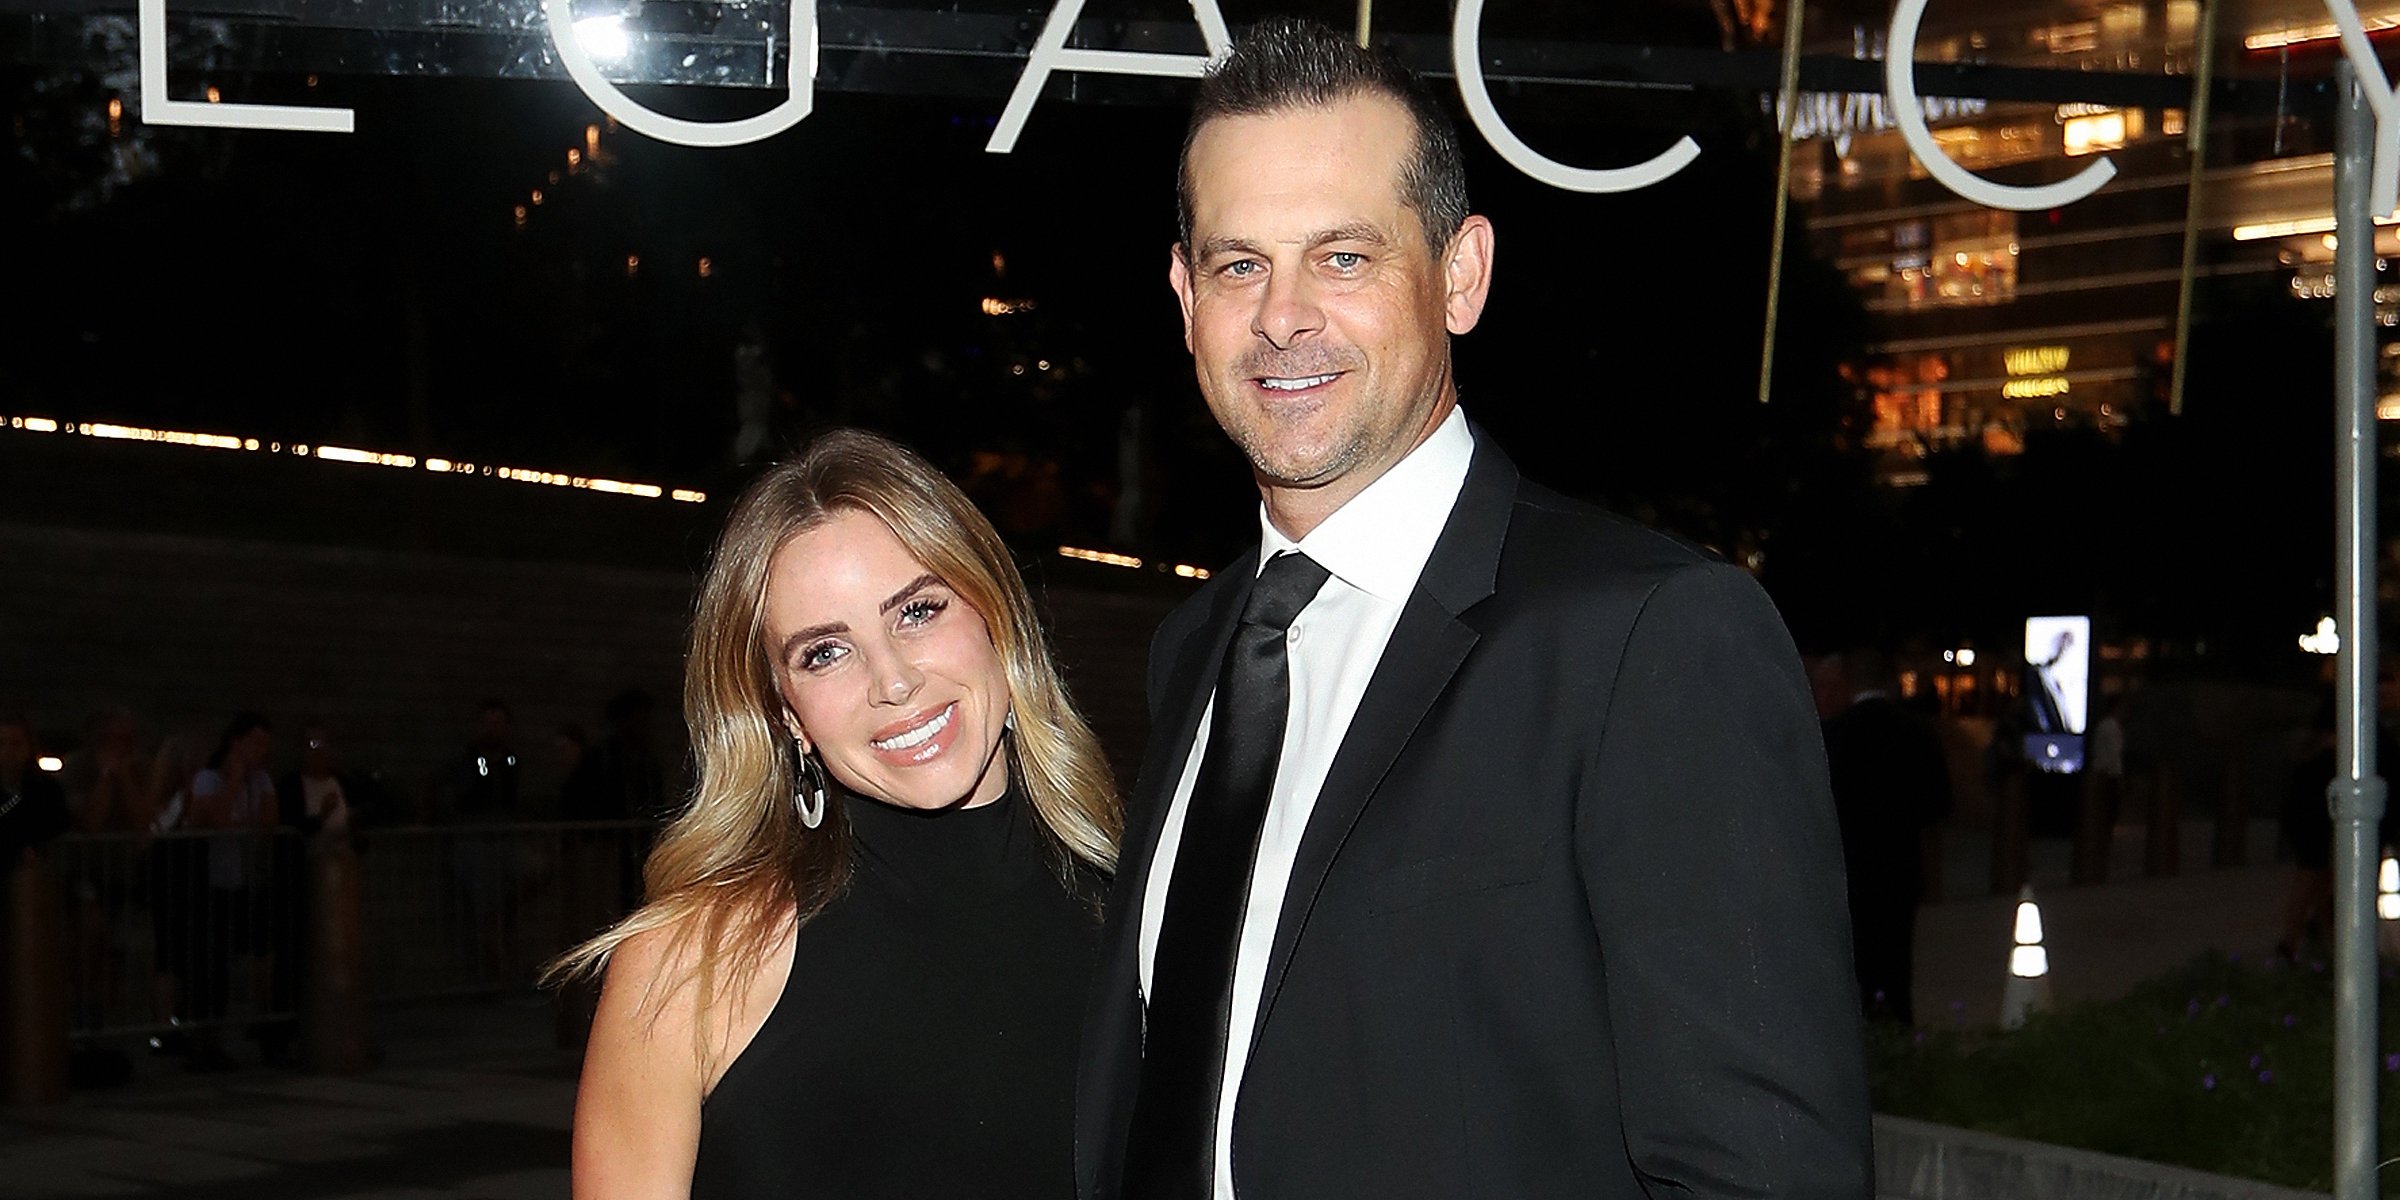 Laura Cover and Aaron Boone. | Source: Getty Images